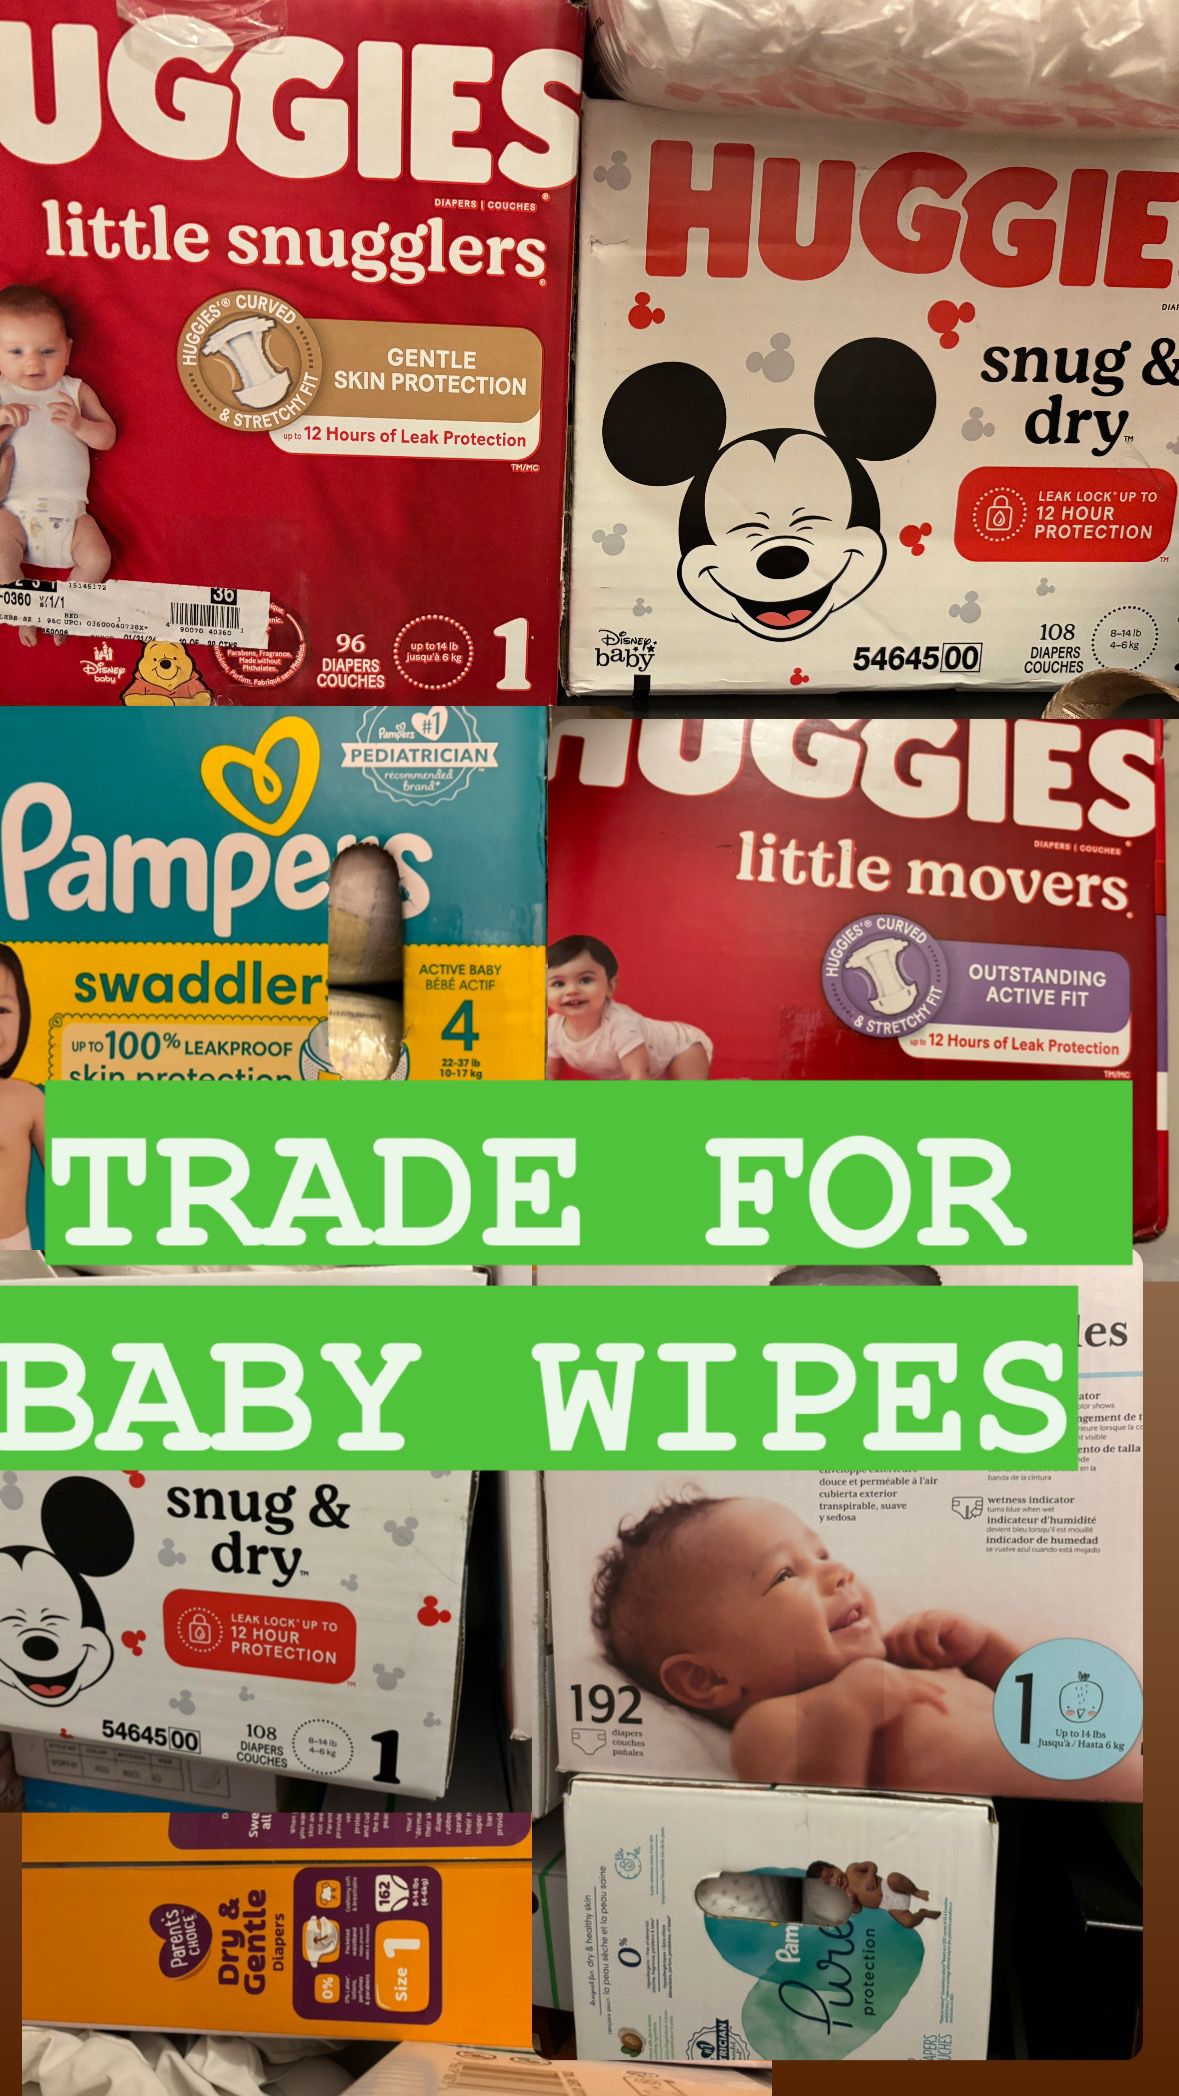 Diapers/wipes